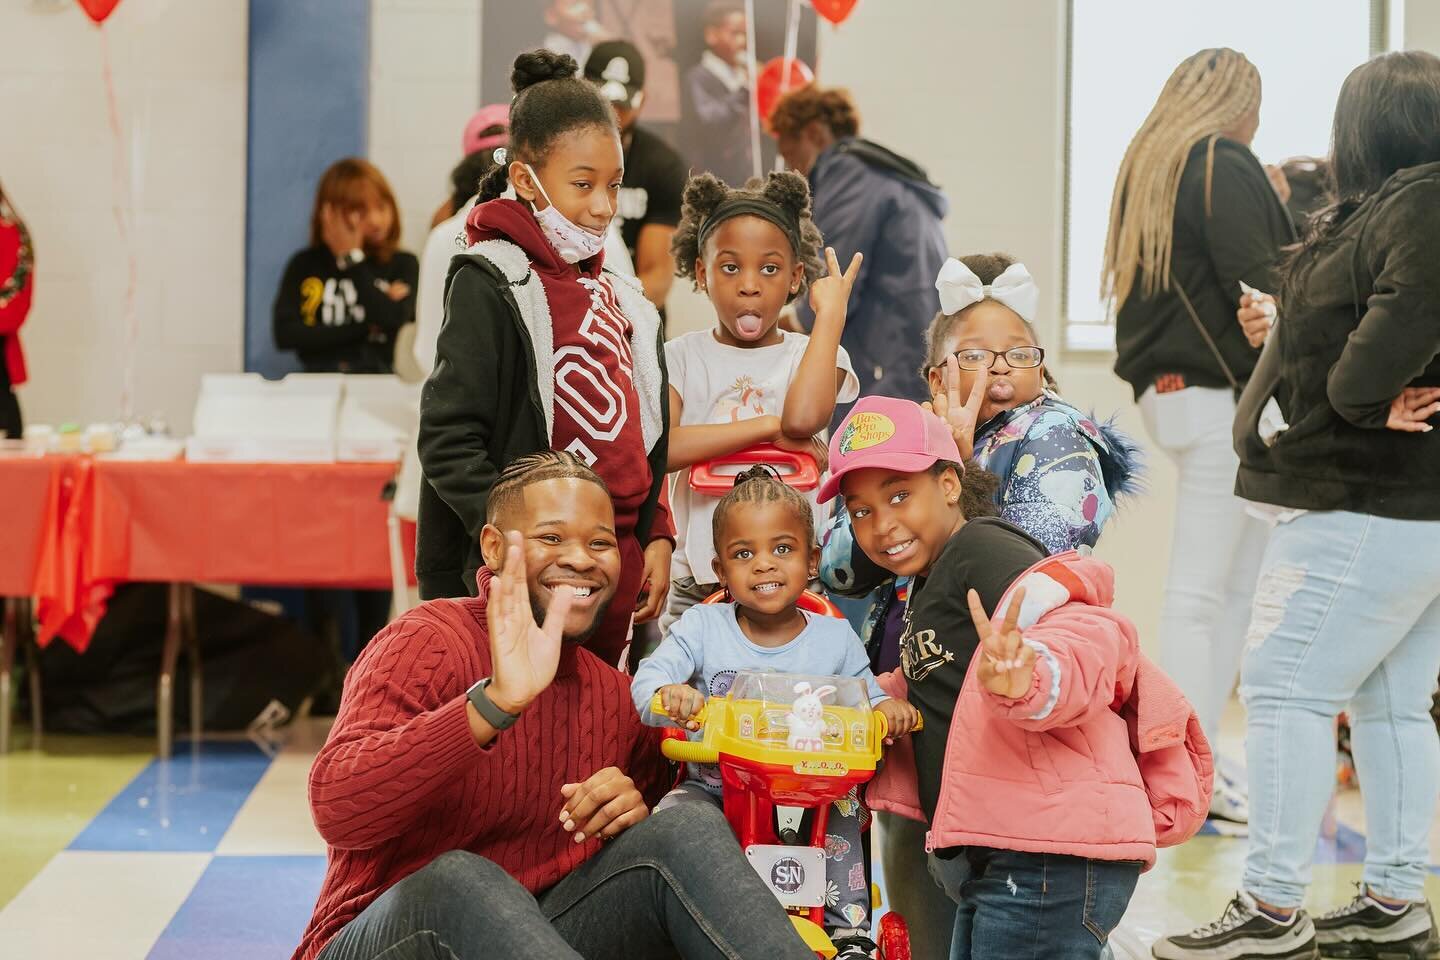 Our holiday toy giveaway in partnership with the Whitney E. Houston Legacy Foundation and the Trinity Girls Network helped bring a smile to many City of Atlanta families just in time for Christmas Day.

We hope everyone left feeling loved because tha